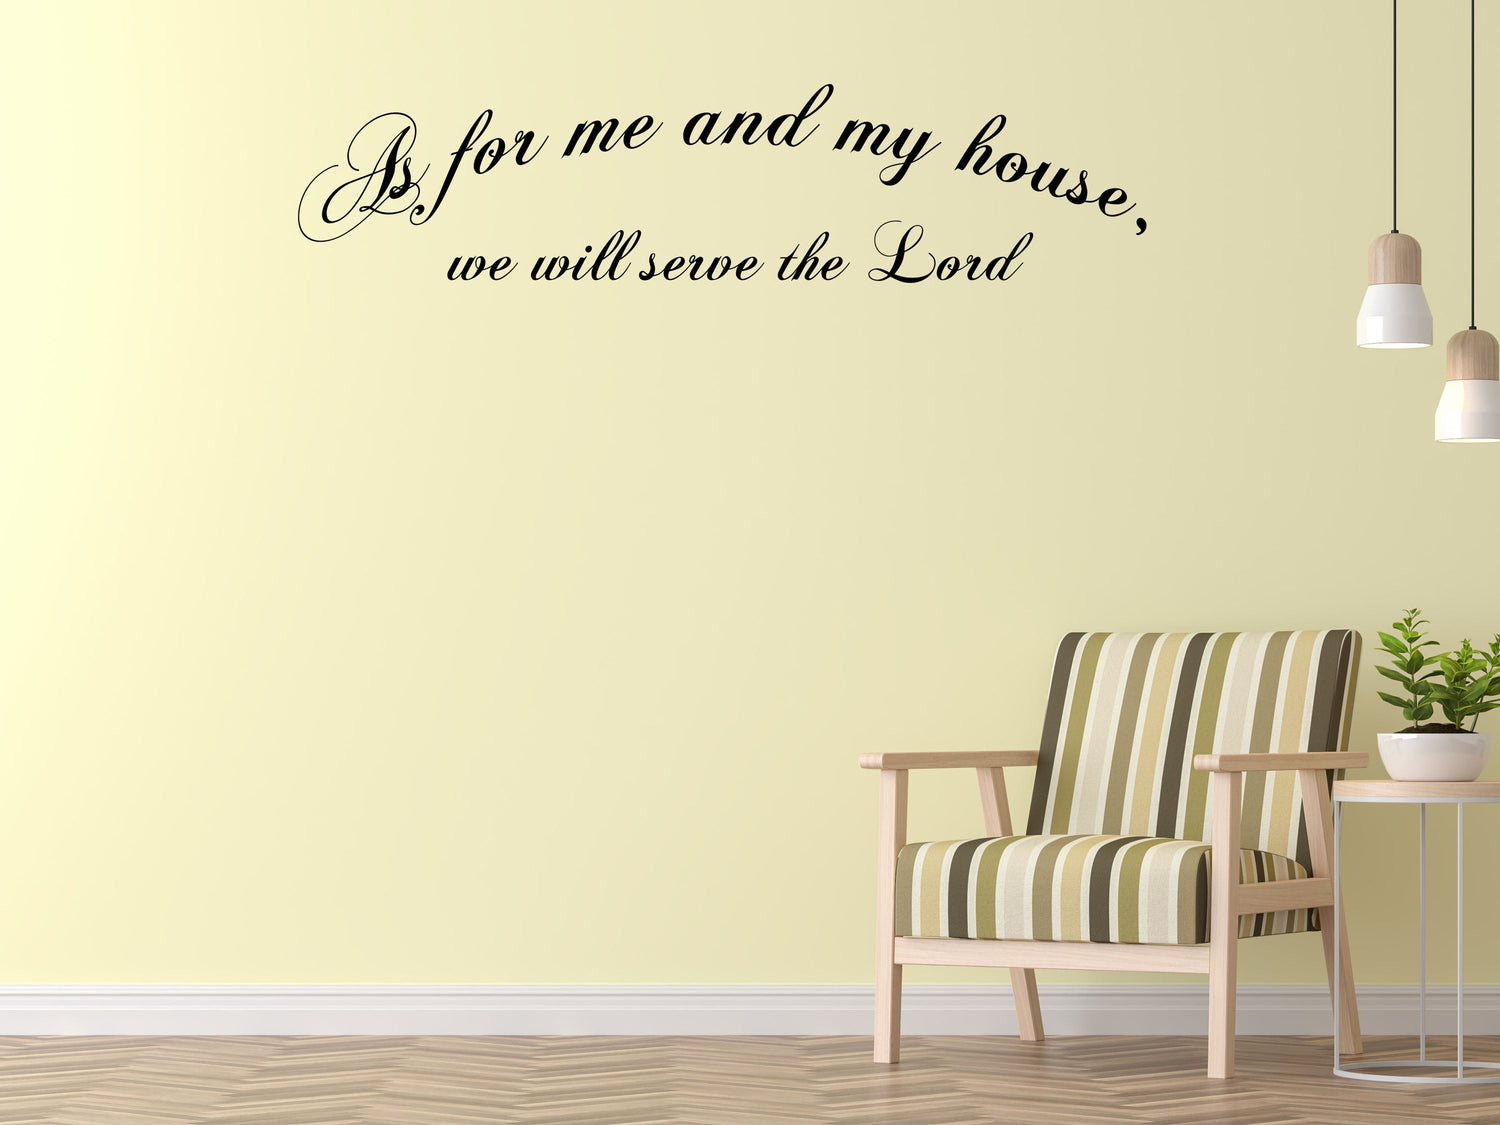 Serve The Lord - Scripture Wall Decals Vinyl Wall Decal Inspirational Wall Signs 